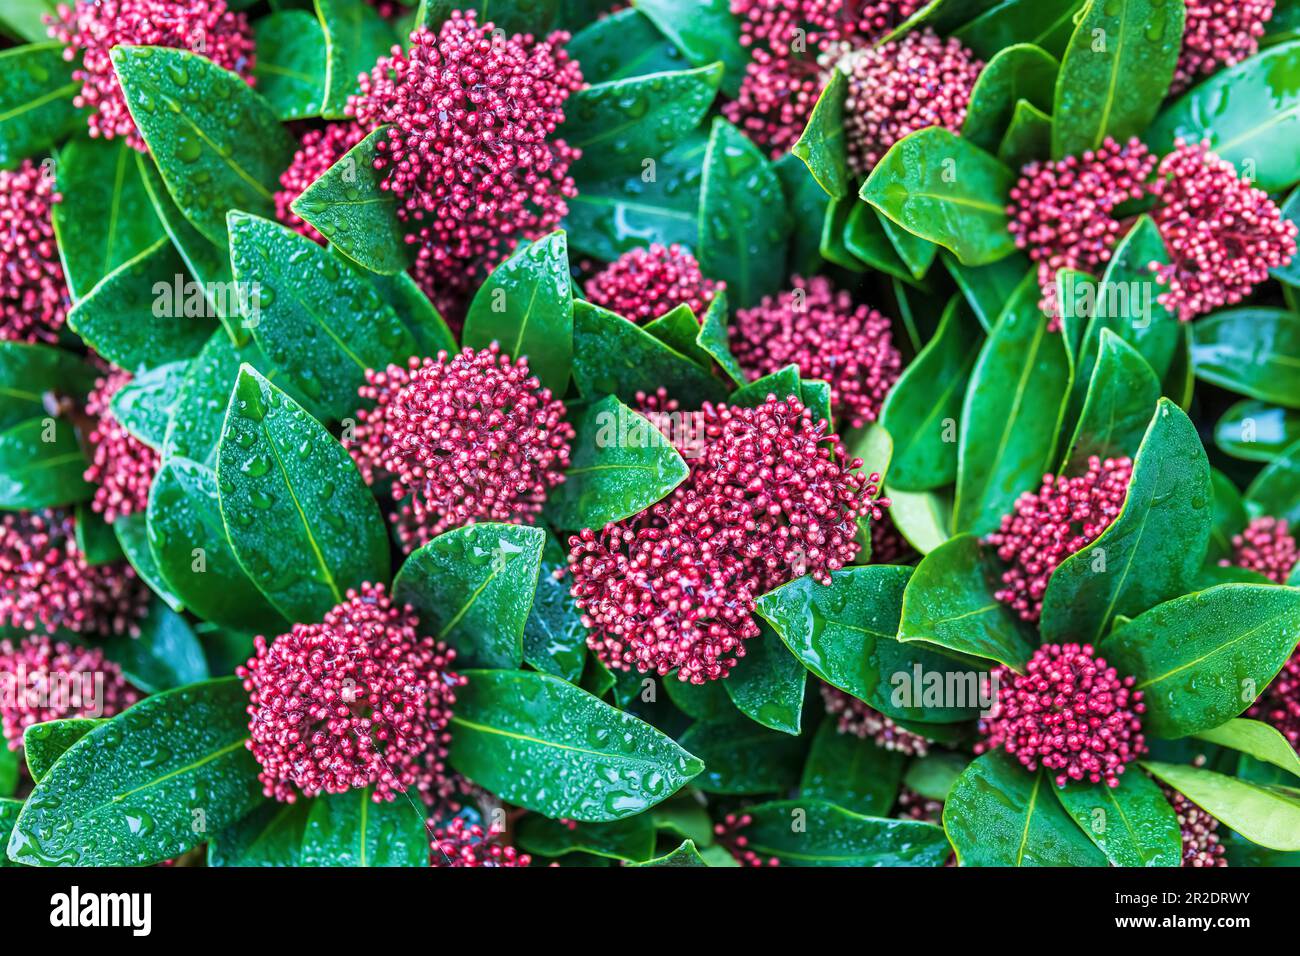 Clusters of decorative purple berries of Skimmia japonica, the Japanese skimmia, is a species of flowering plant in the family Rutaceae. Stock Photo